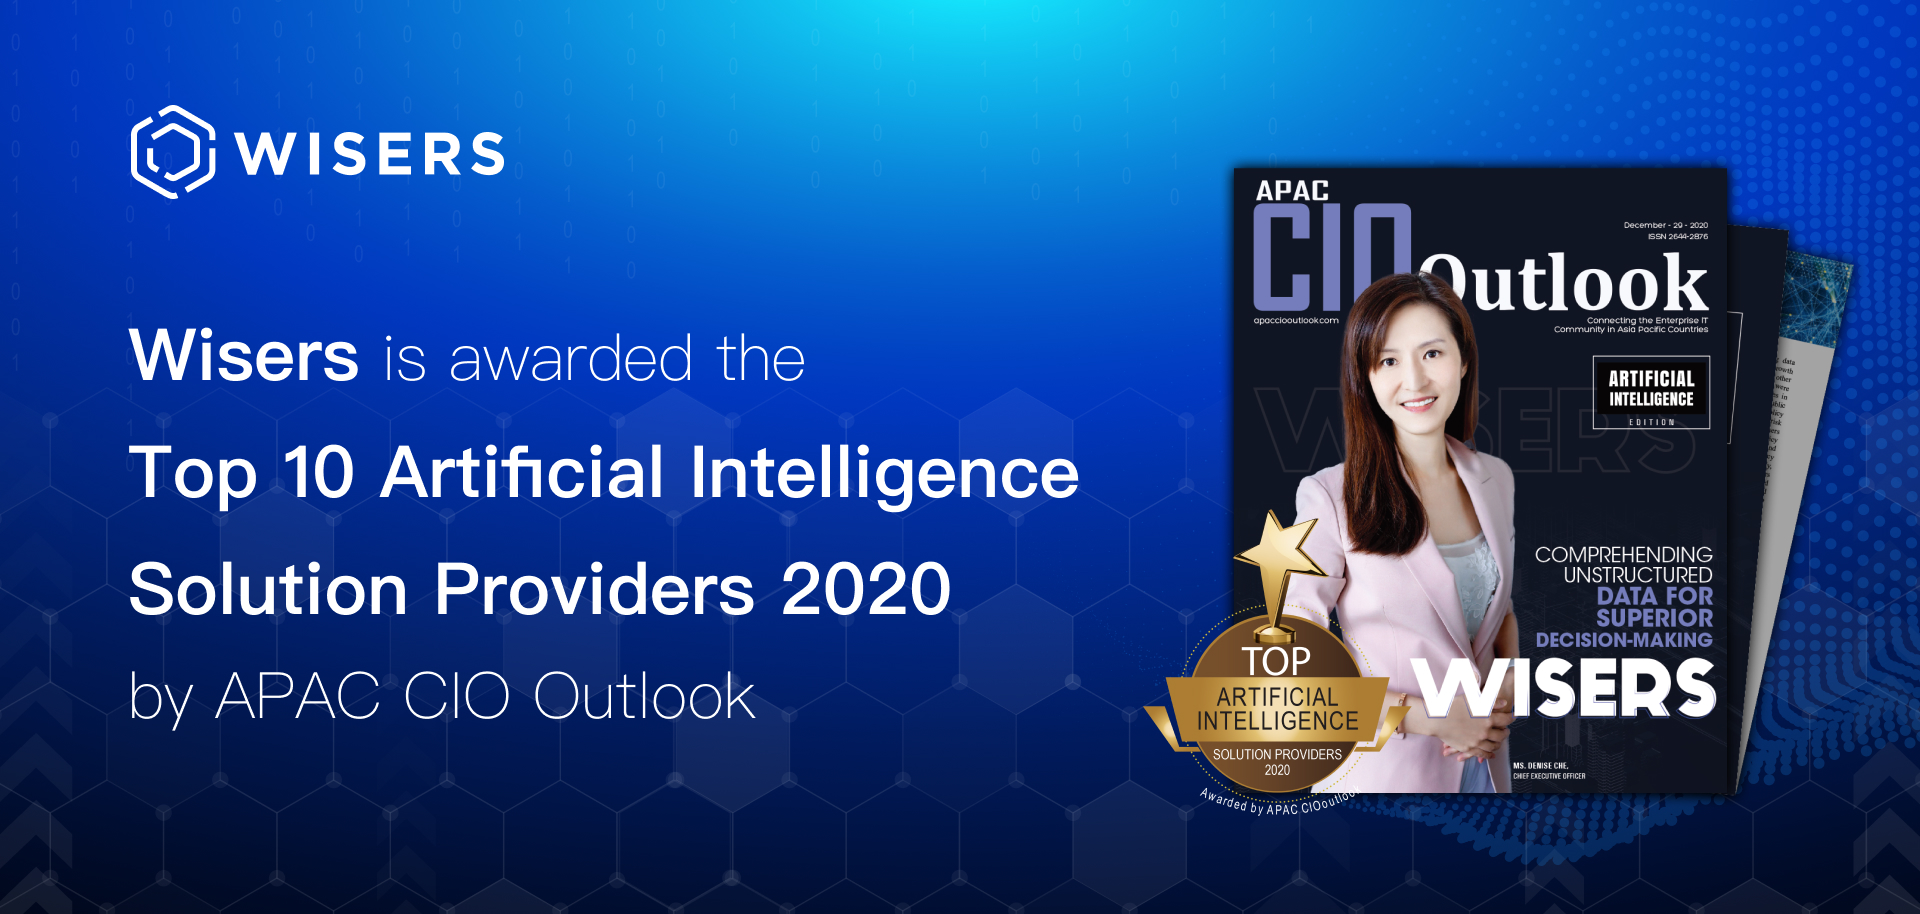 Wisers is Crowned One of APAC CIO Outlook's Top 10 Artificial Intelligence Solution Providers in 2020